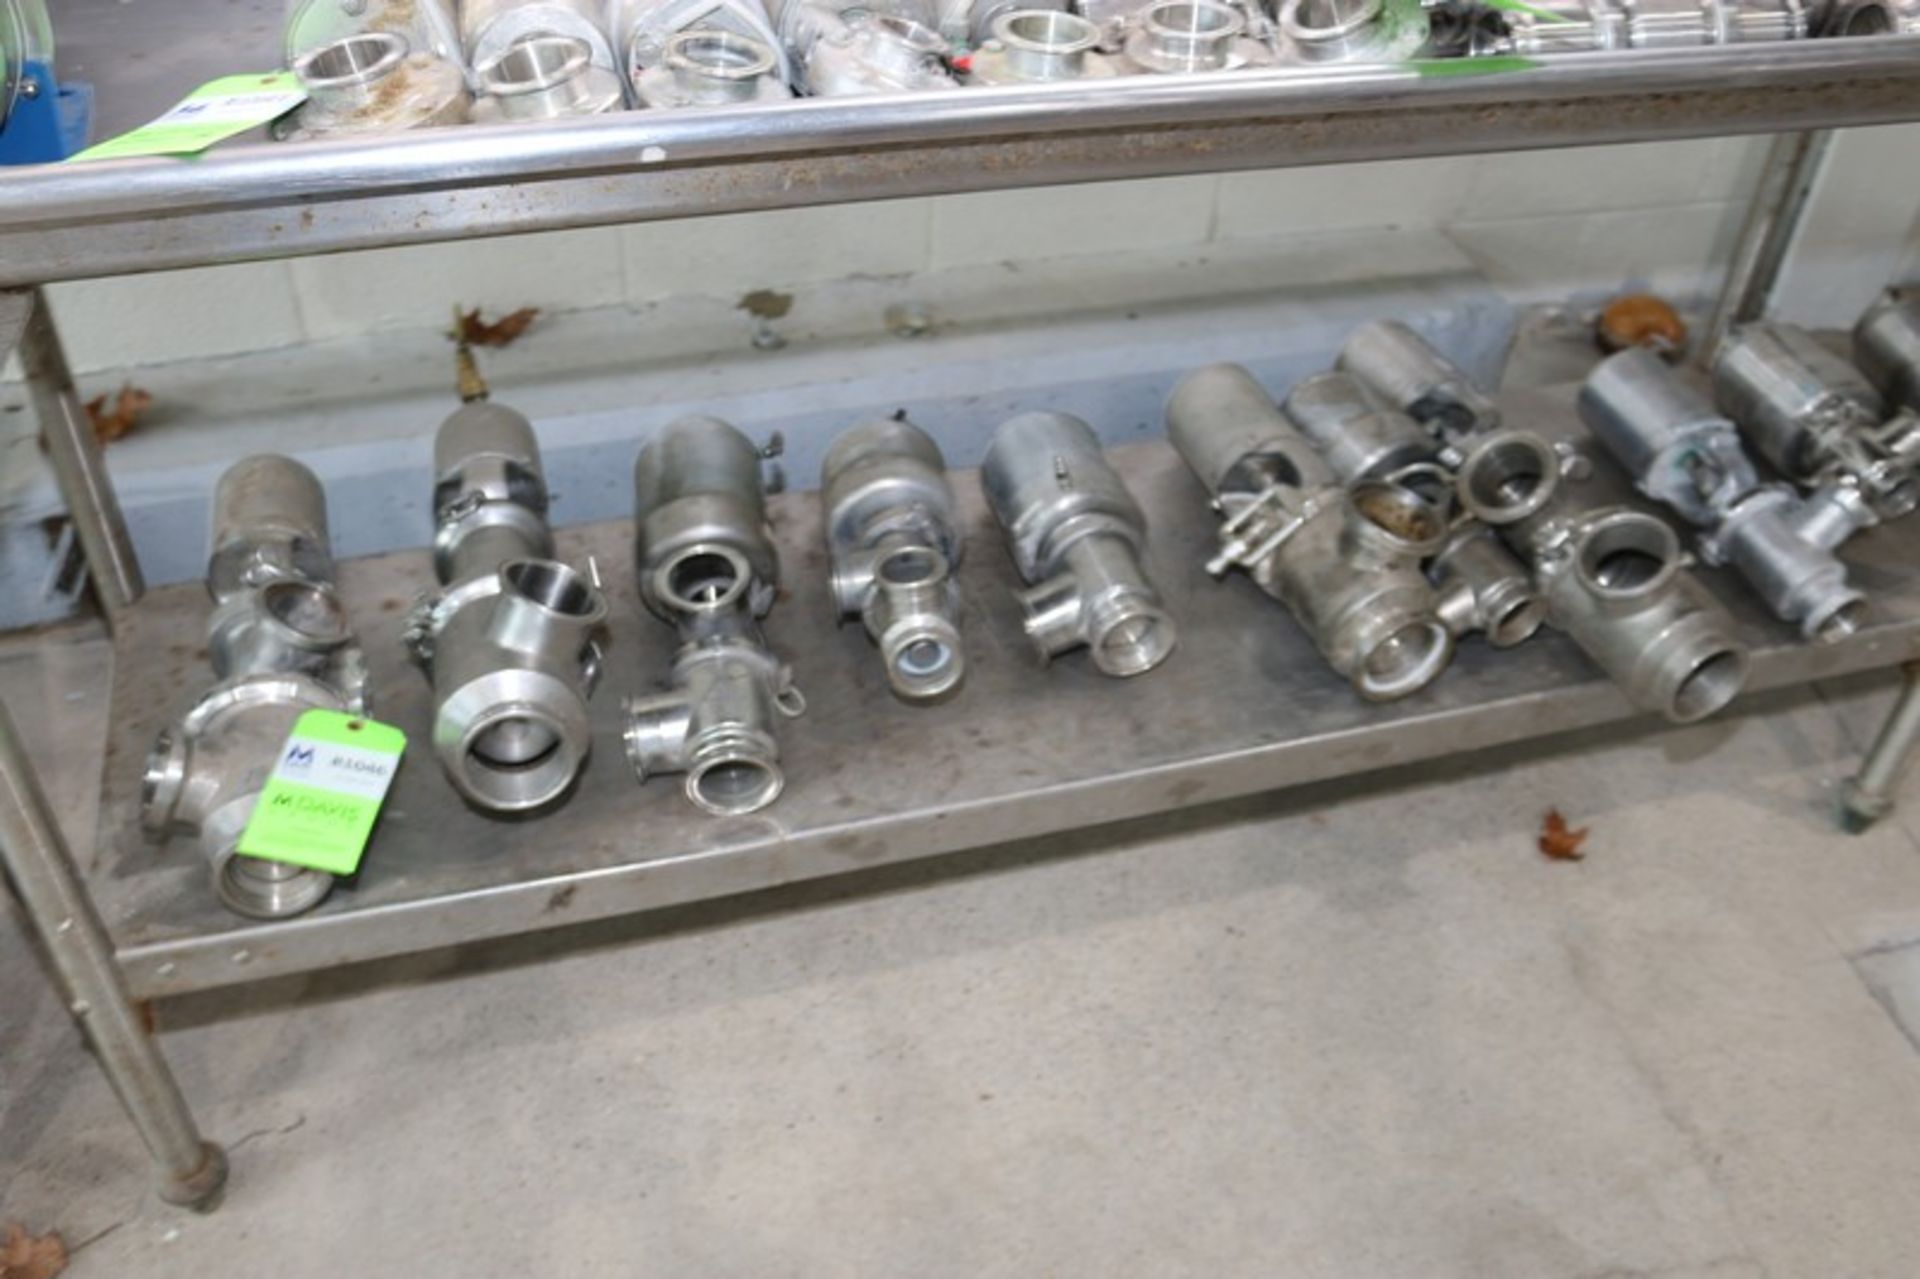 (16) S/S Air Valves,Some 2-Way Type & 3-Way Type, Assorted Sizes (INV#81046)(Located @ the MDG